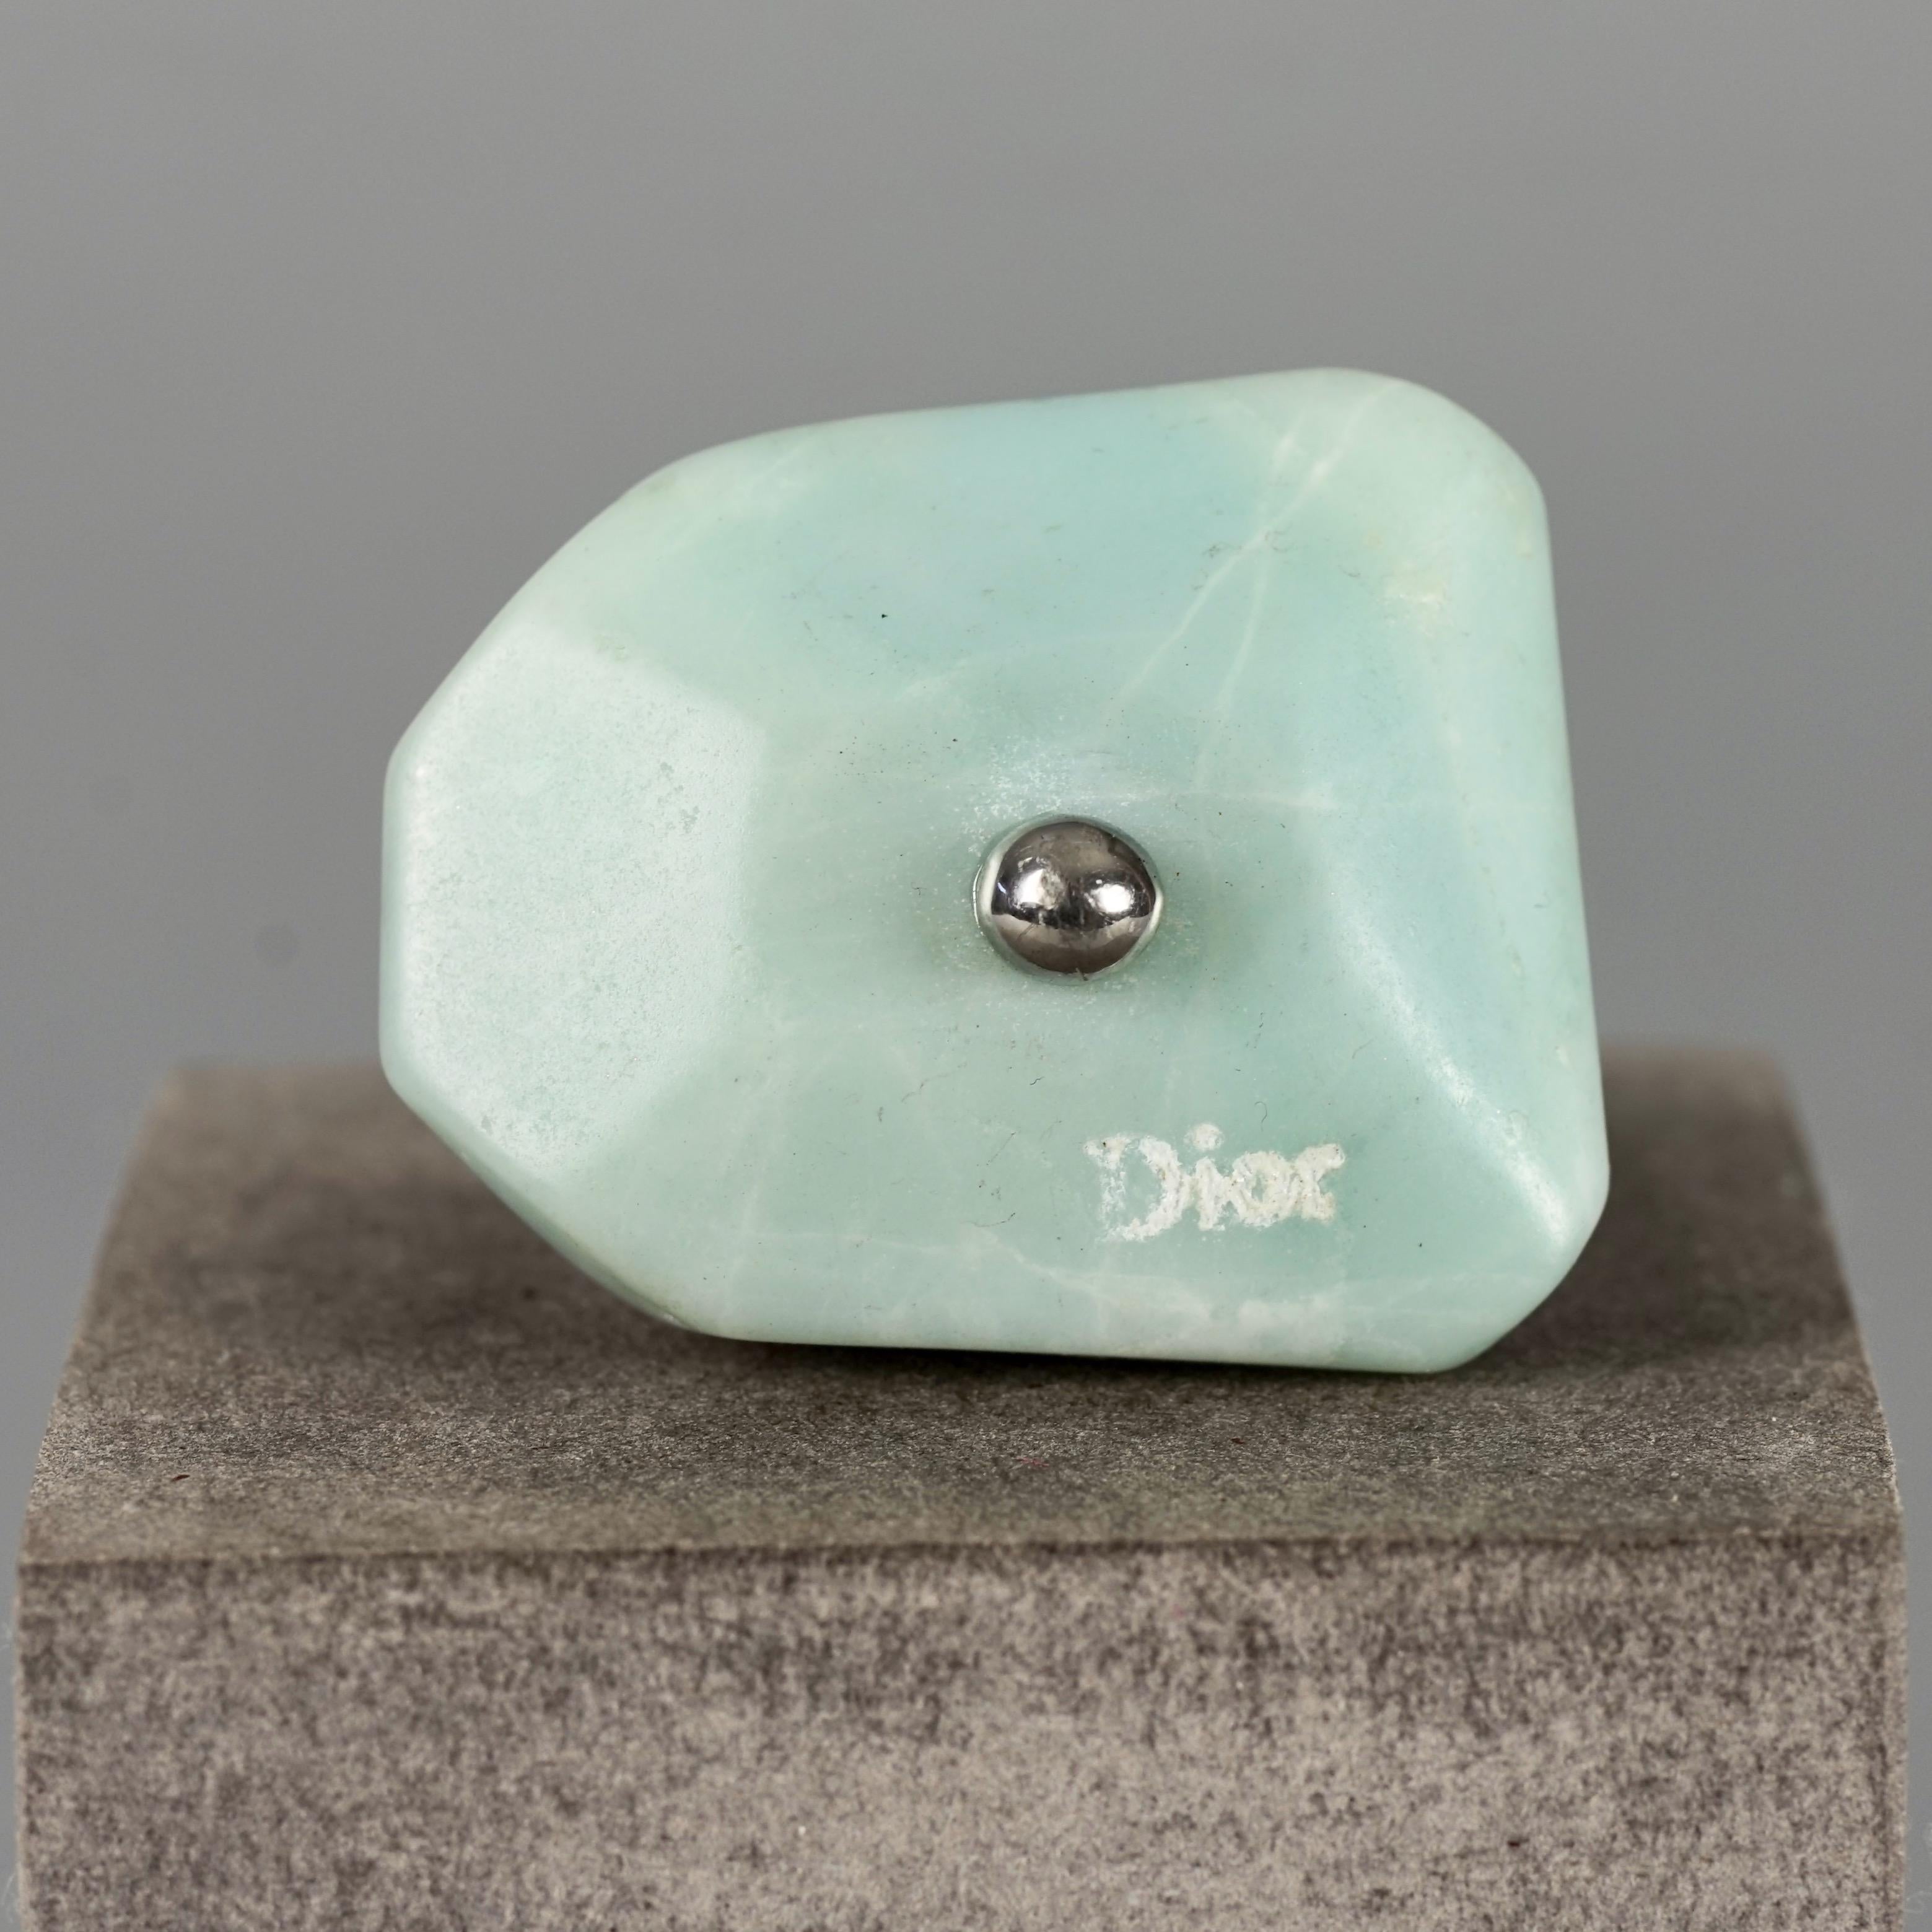 Vintage CHRISTIAN DIOR Logo Geometric Ring

Measurements:
SIZE: US5 / FR50
Face Height: 1.10 inches (2.8 cm)
Face Width: 1.33 inches (3.4 cm)

Features:
- 100% Authentic CHRISTIAN DIOR.
- DIOR logo on massive geometric jade resin.
- Black chrome